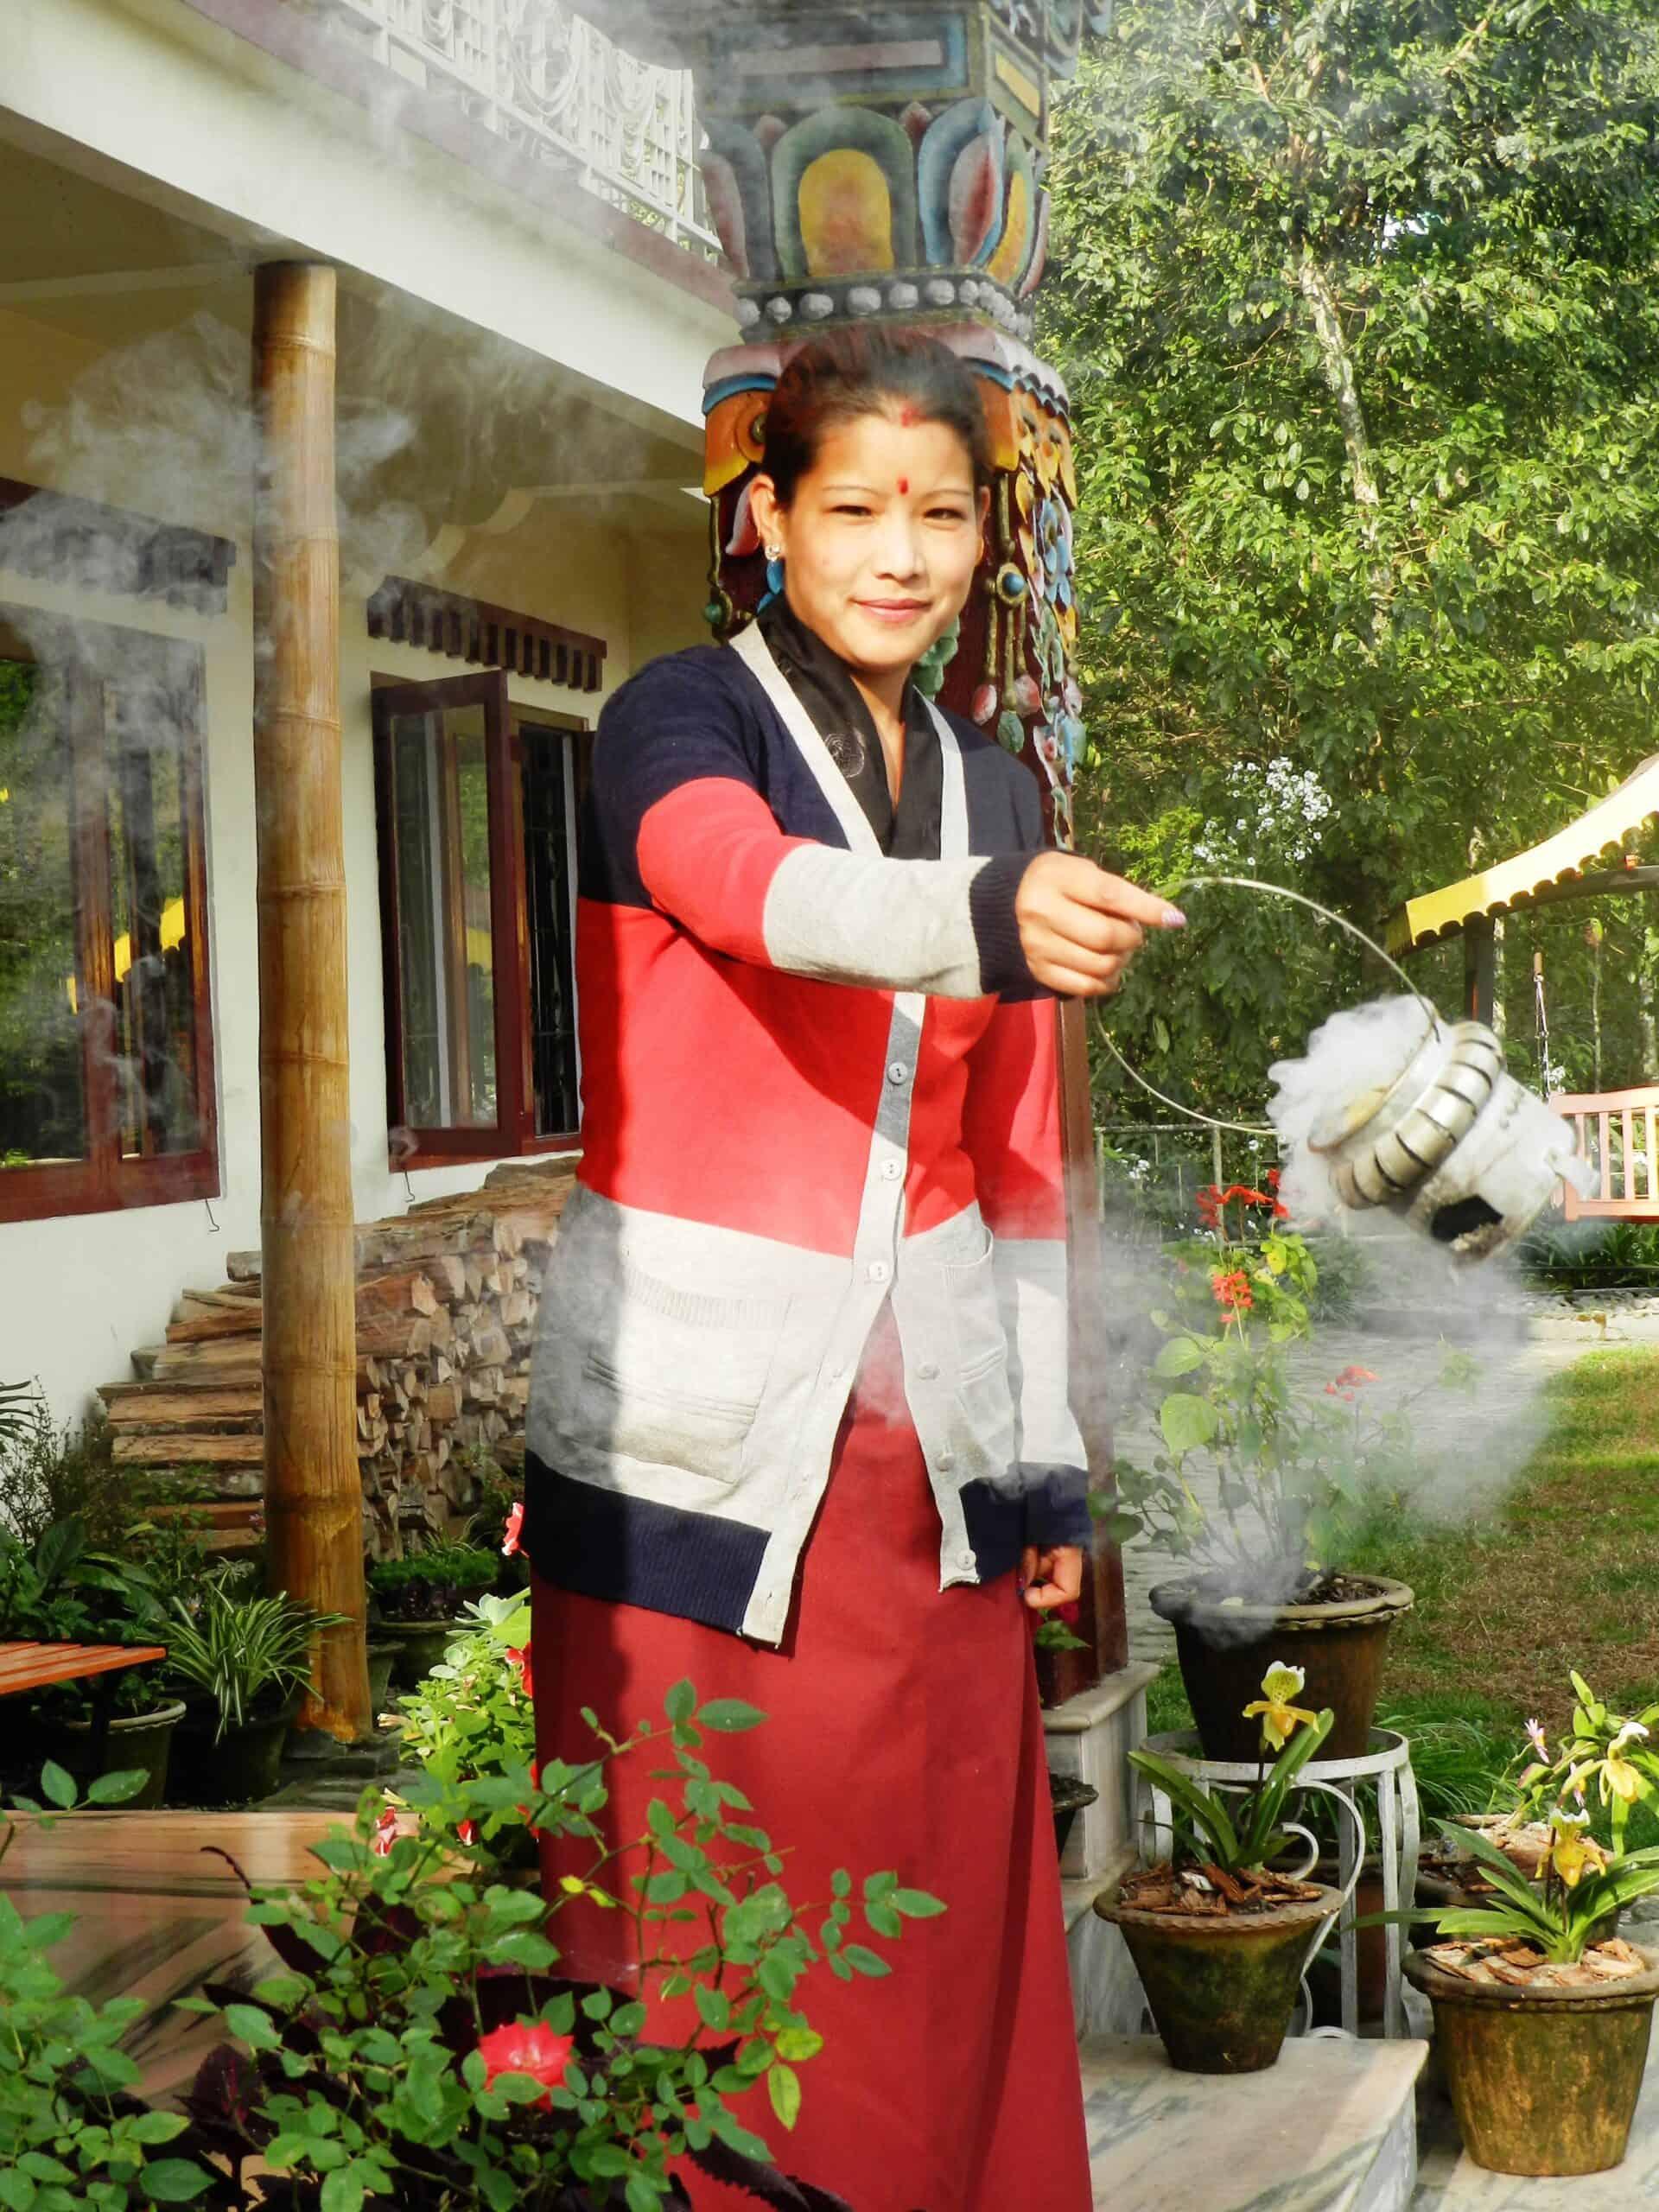 Bamboo Retreat Hotel - image "Sikkim – The scent of traditional cleansing & healing in the Himalaya" 39